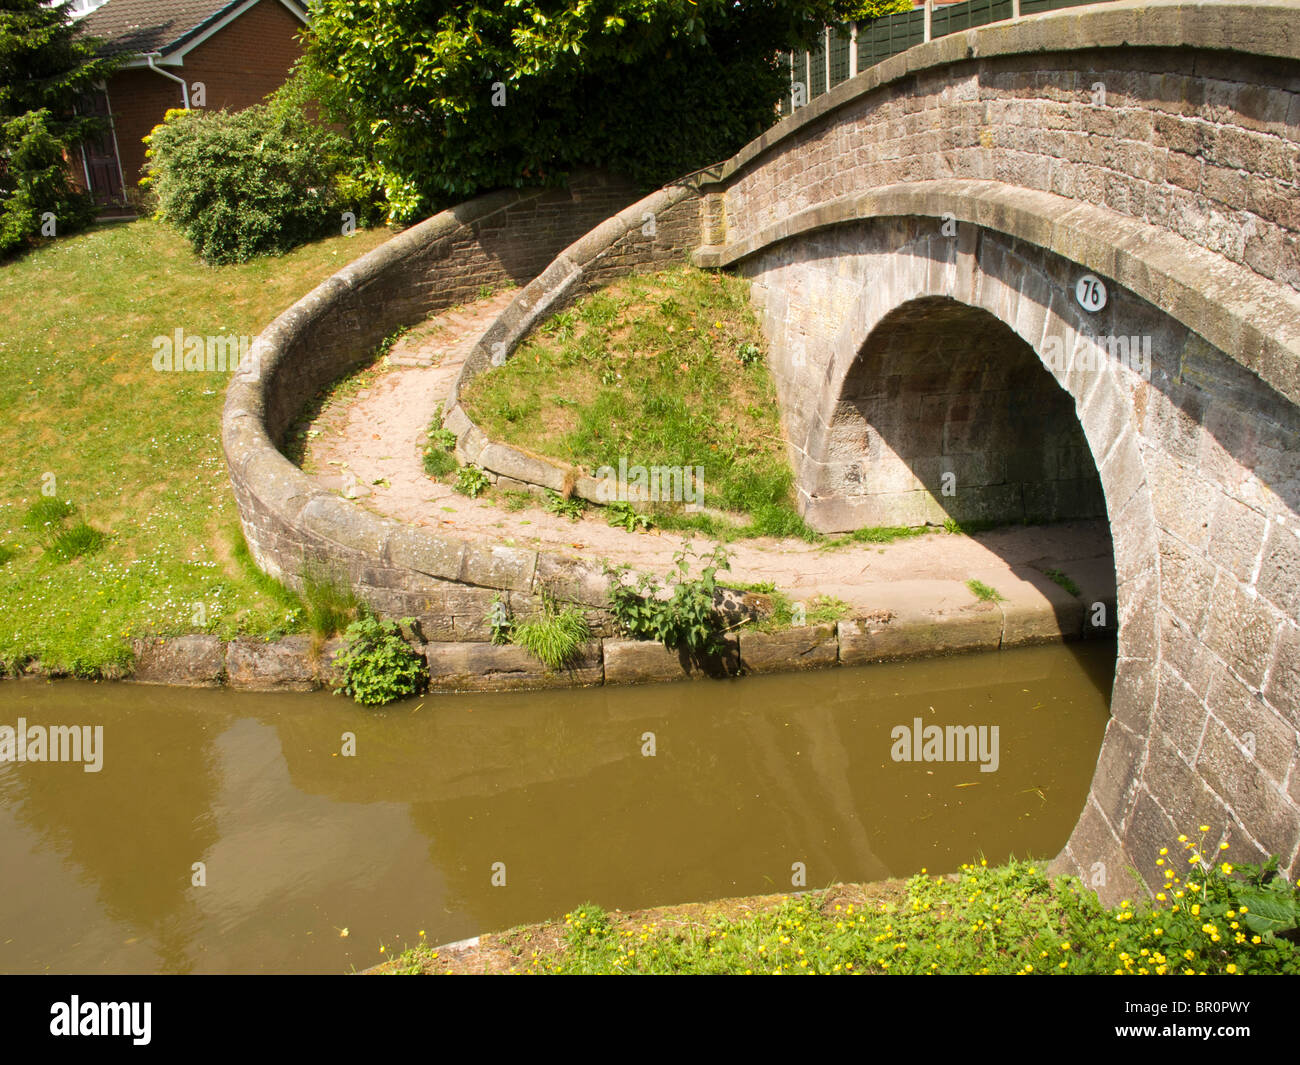 UK, England, Cheshire, Congleton, Macclesfield canal, bridge with curved path to allow horses to change towpath Stock Photo